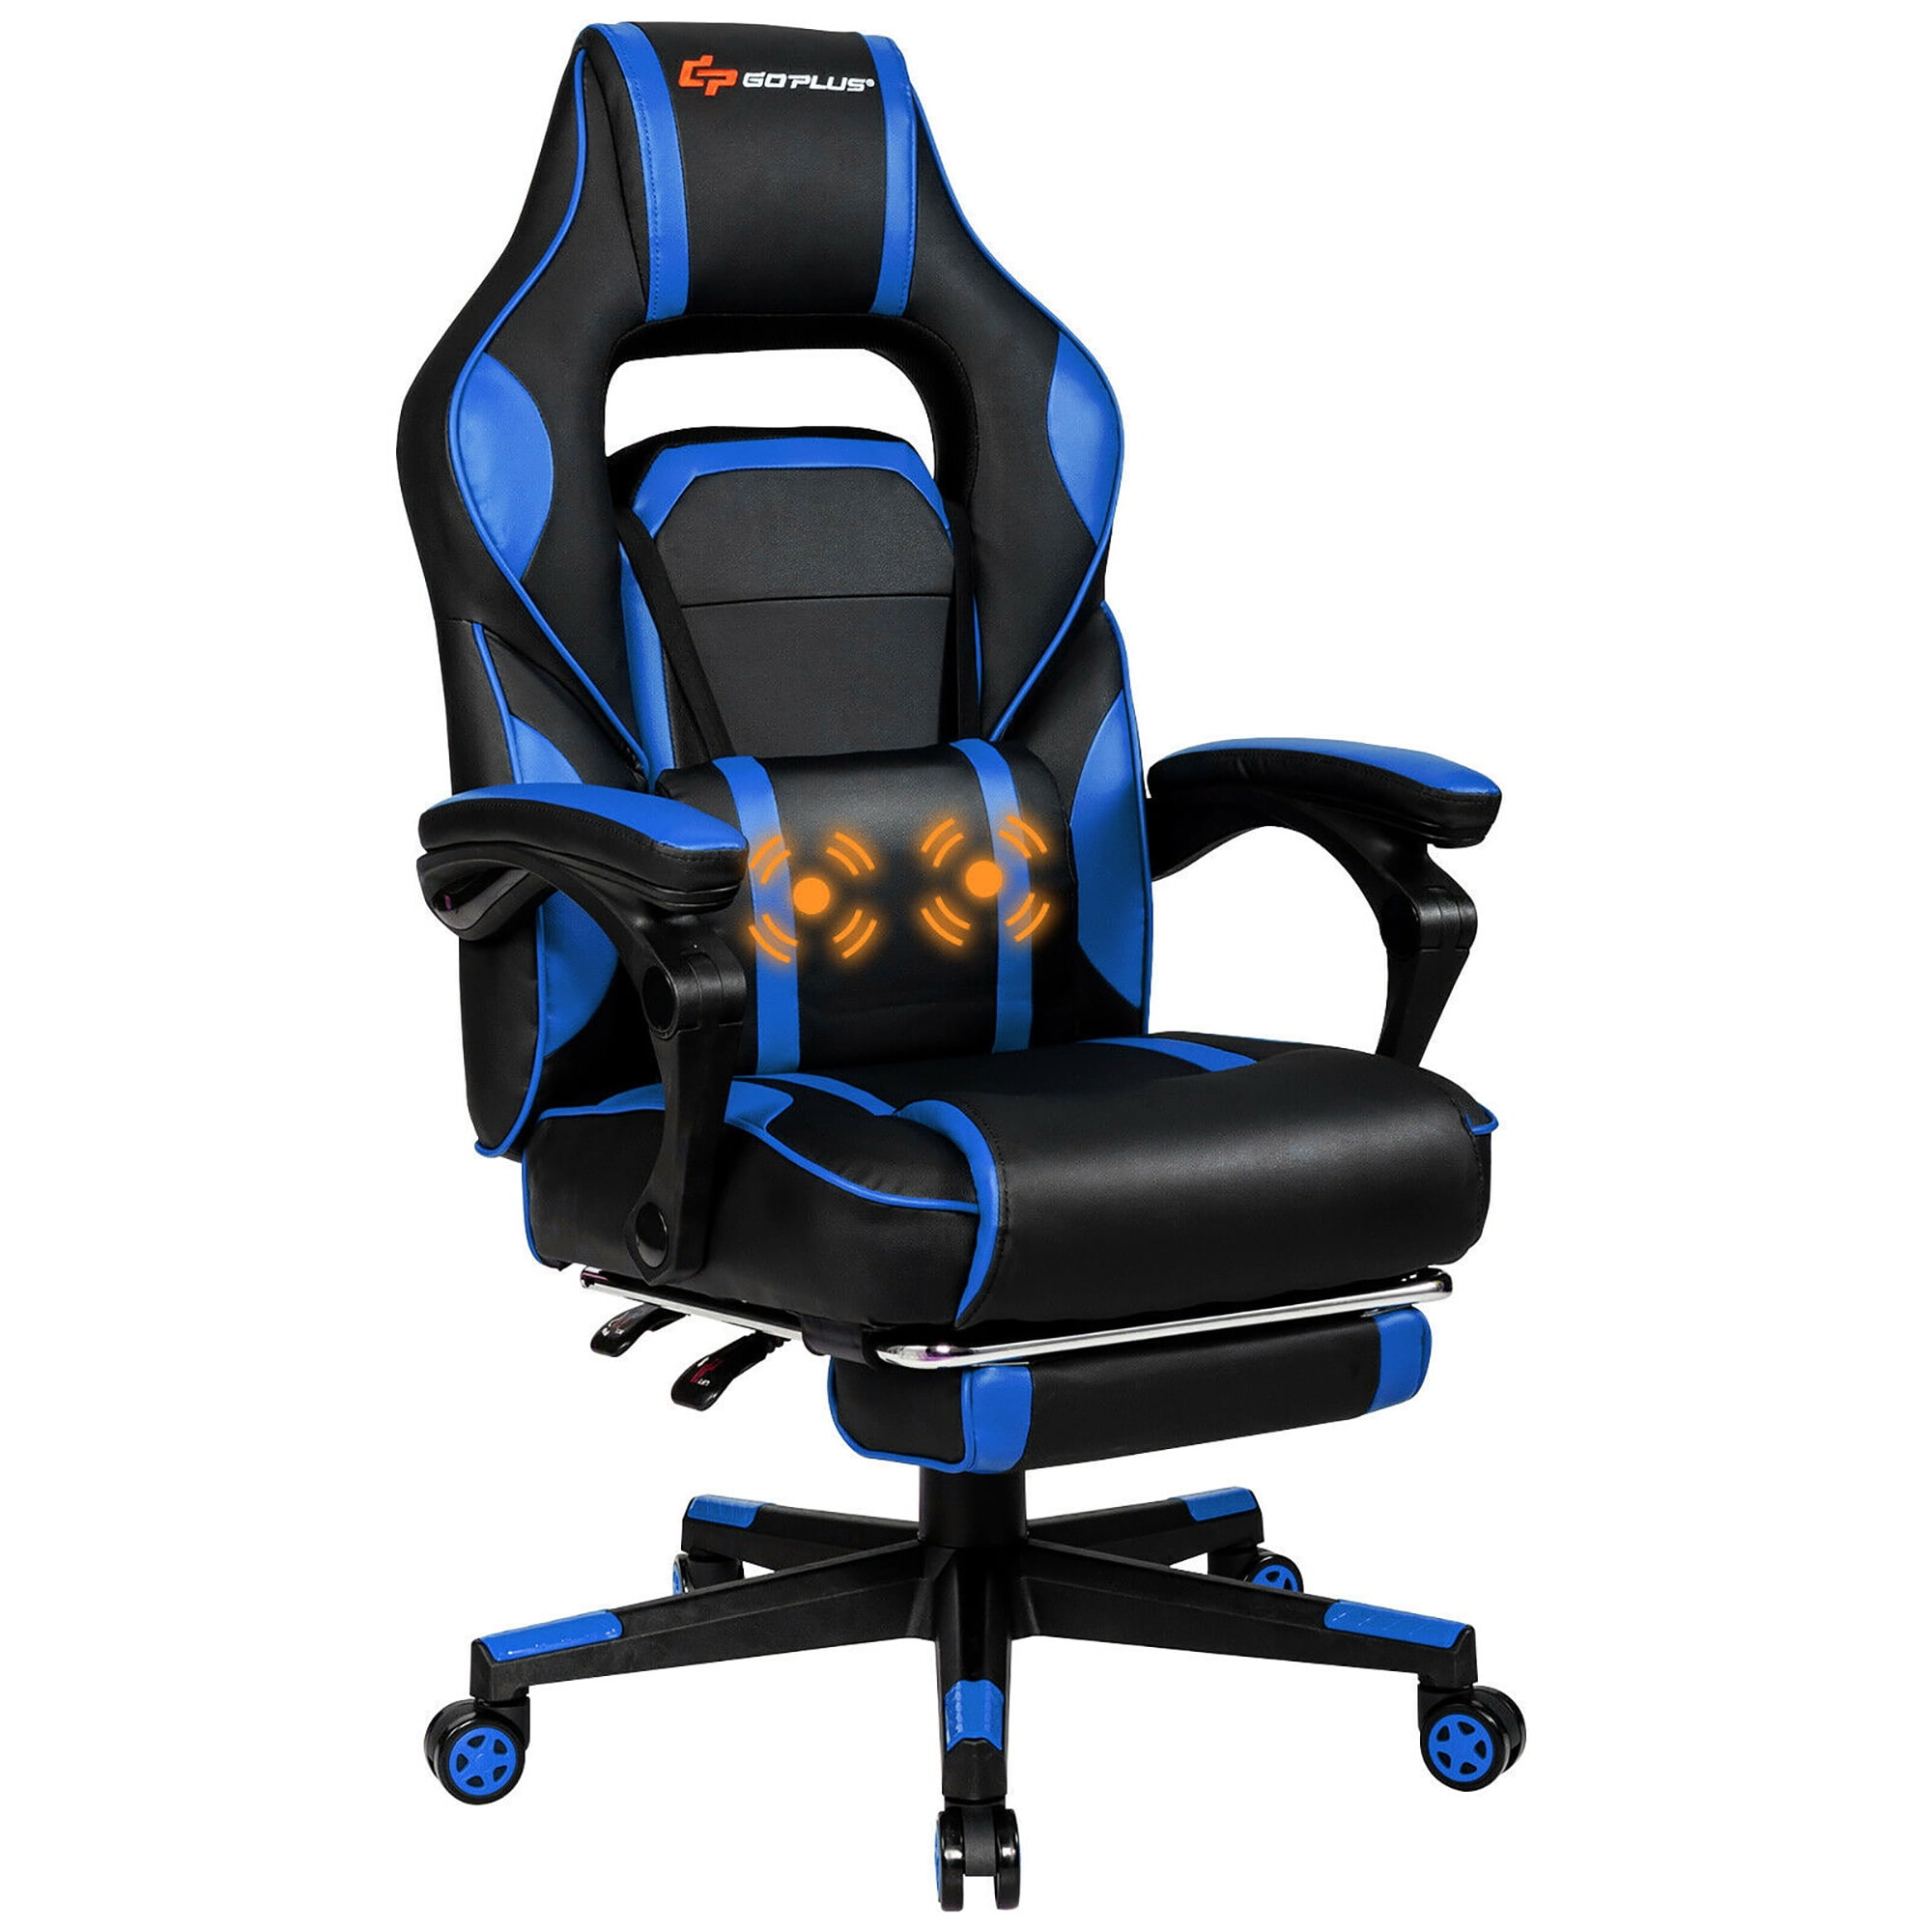 Merax High-Back Racing Home Office Chair Ergonomic Gaming Chair with Footrest, 